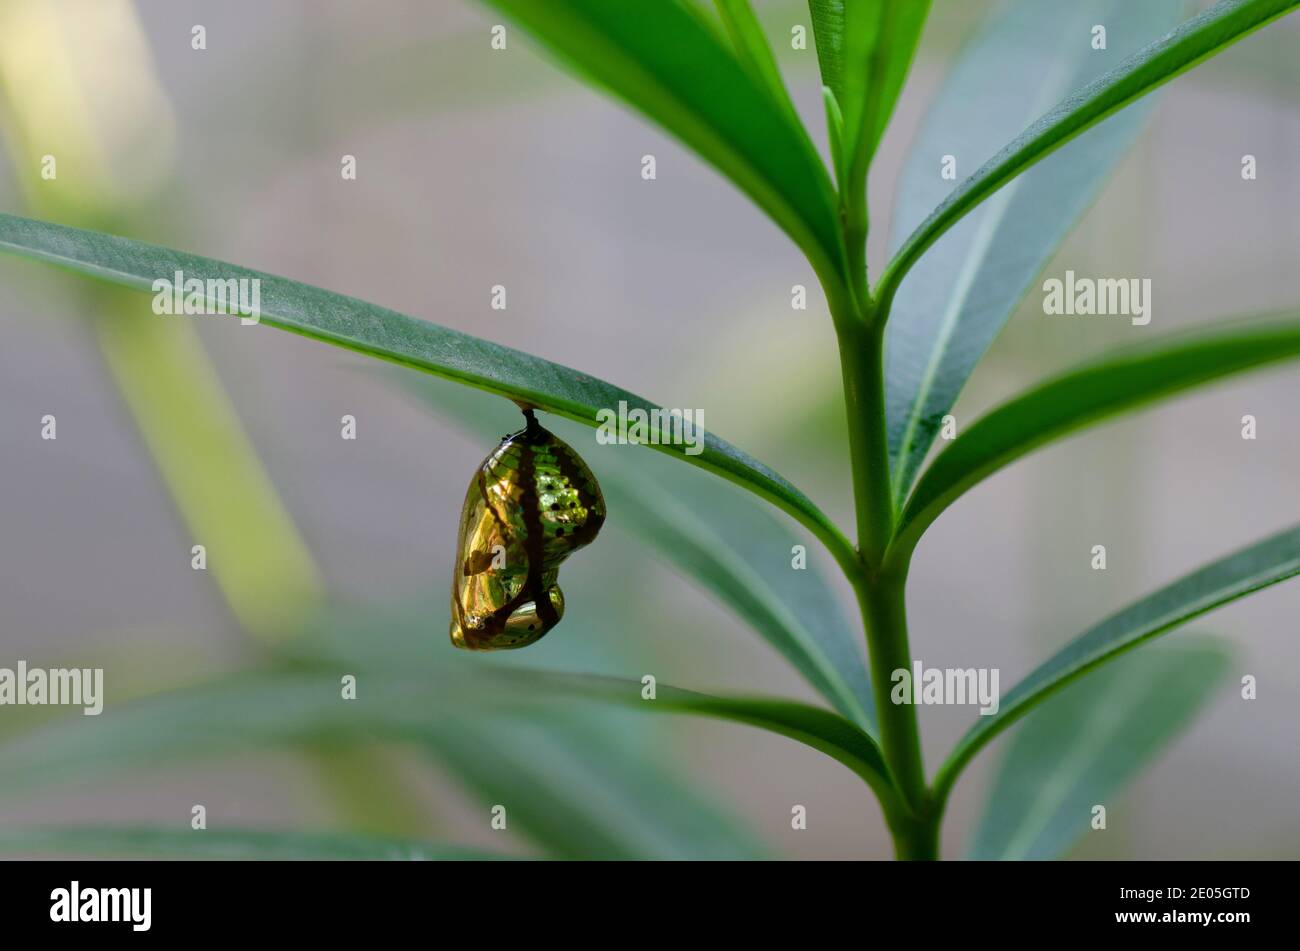 Shiny Golden colored Pupa of Common Crow Butterfly Species on Nerium plant Stock Photo